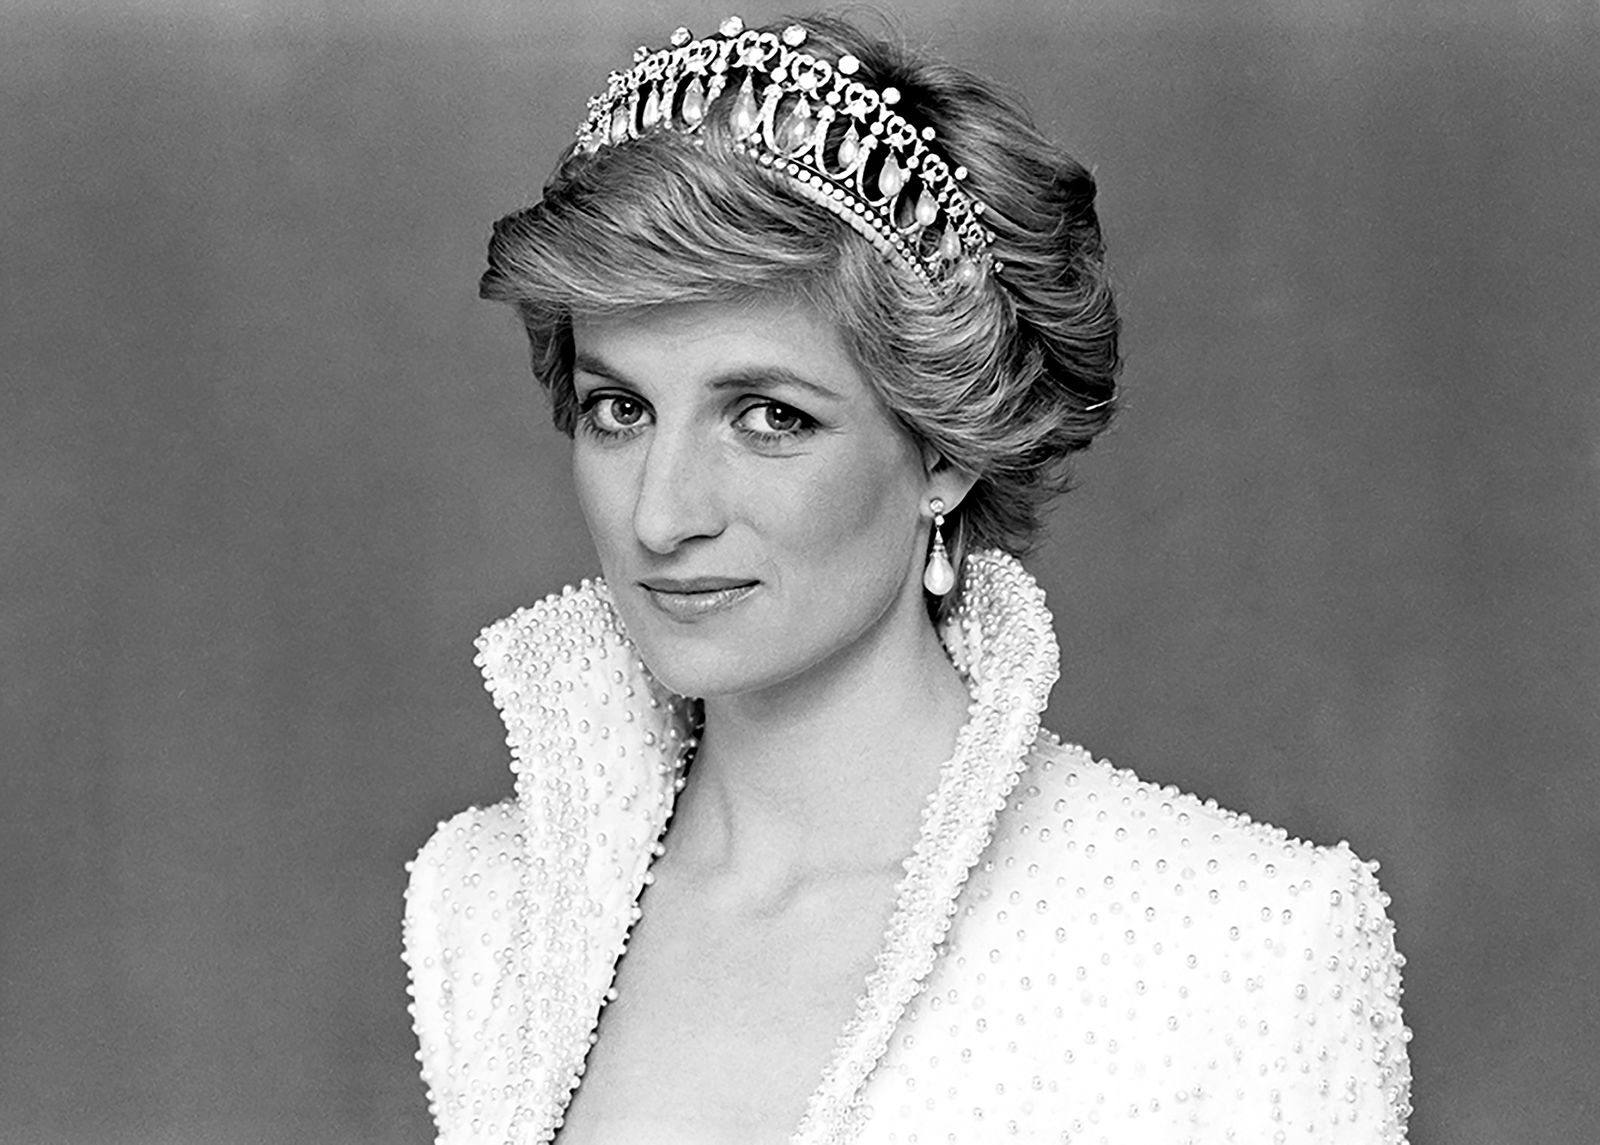 Princess Diana’s Iconic Dress Sells For $1.1 Million At Auction